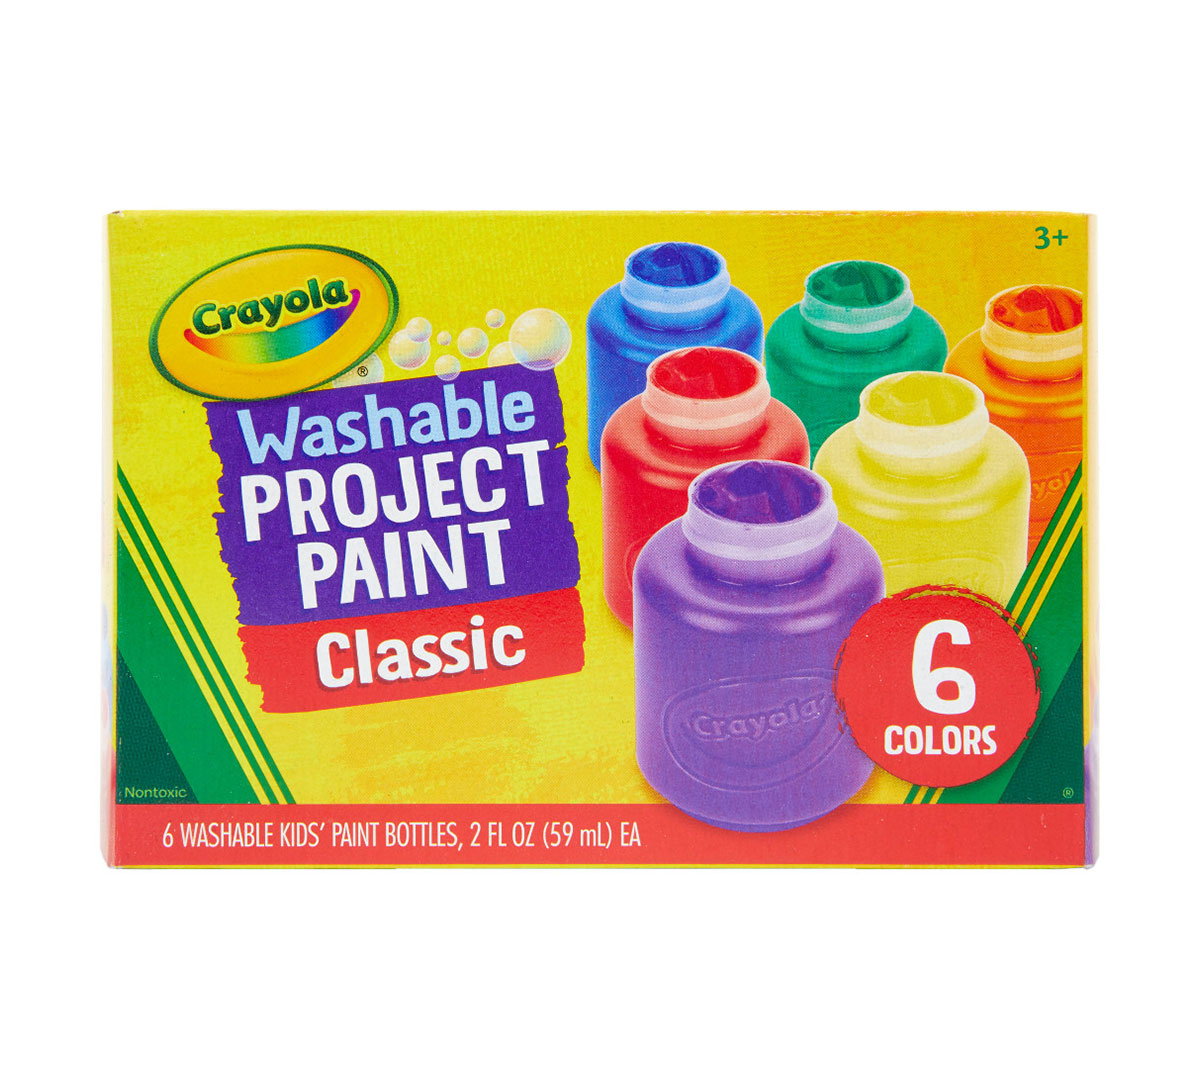 NEW 6 PACK CRAYOLA WASHABLE OFF CLOTHES KIDS PAINT SET CLASSIC COLORS NON-TOXIC 